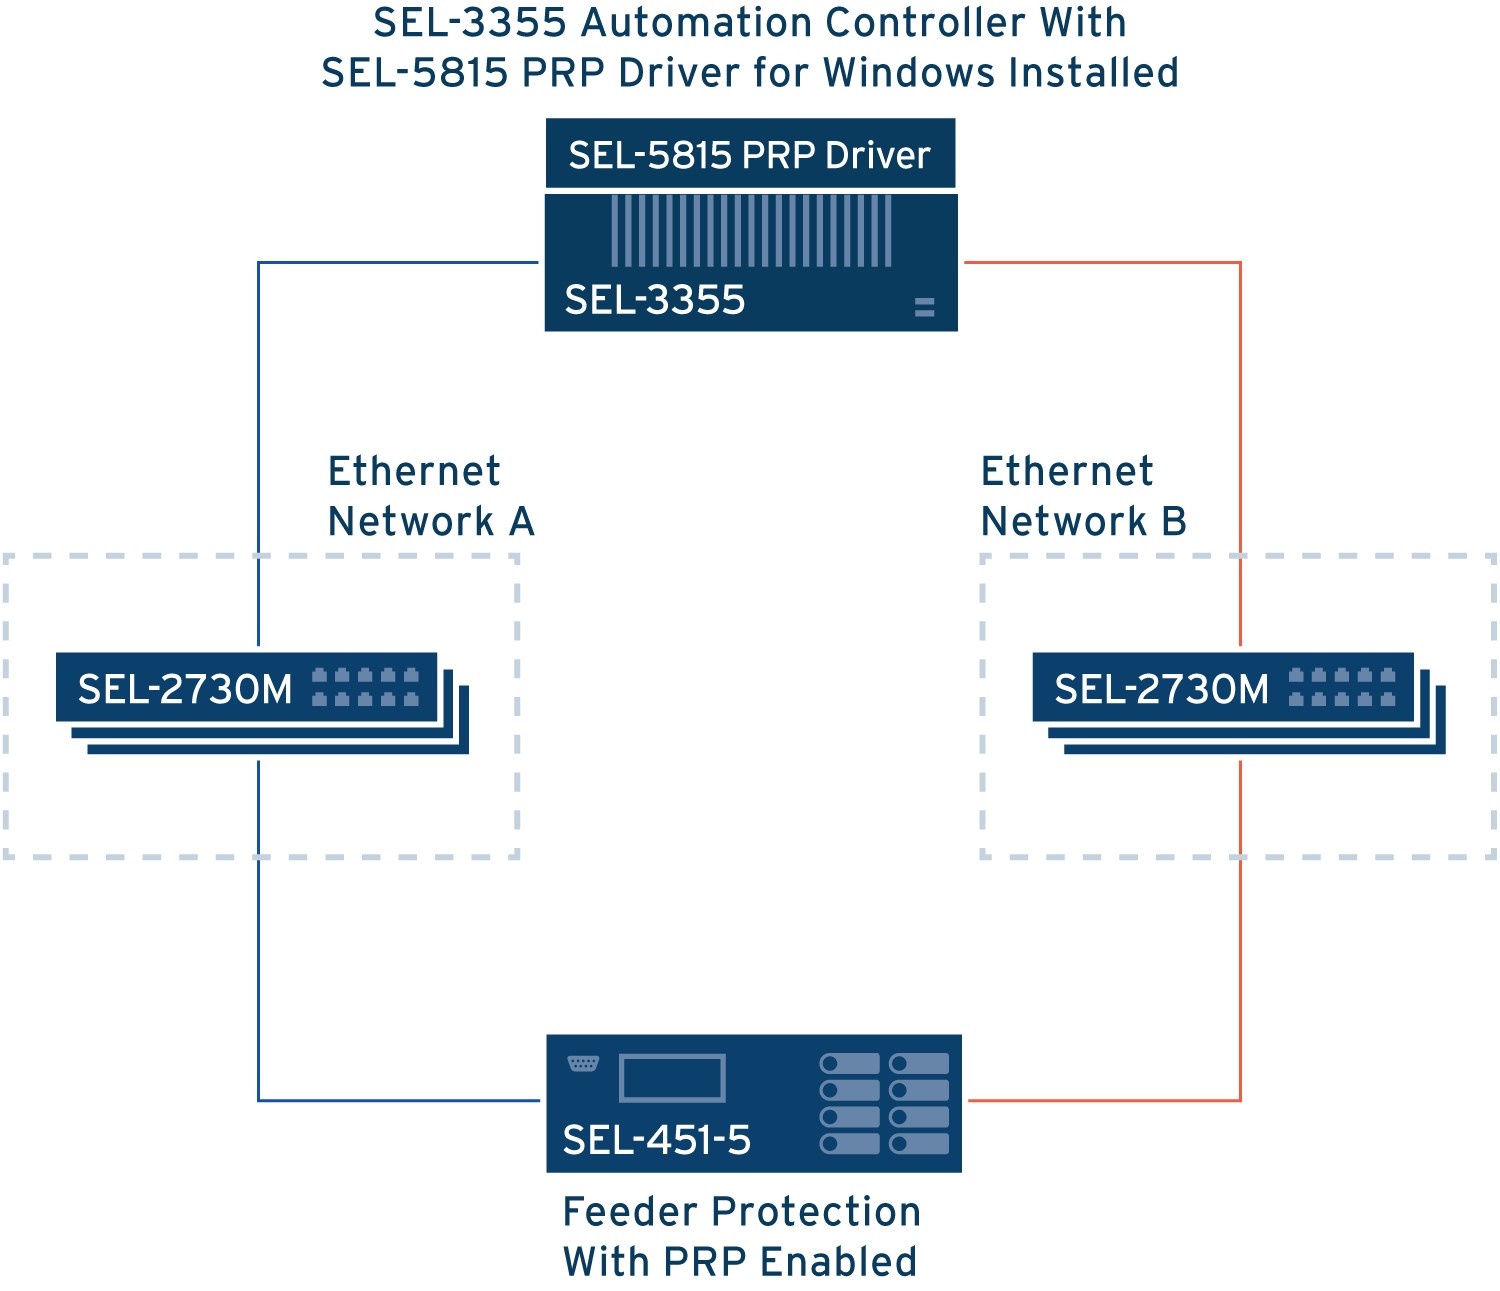 SEL-5815 PRP Network Overview